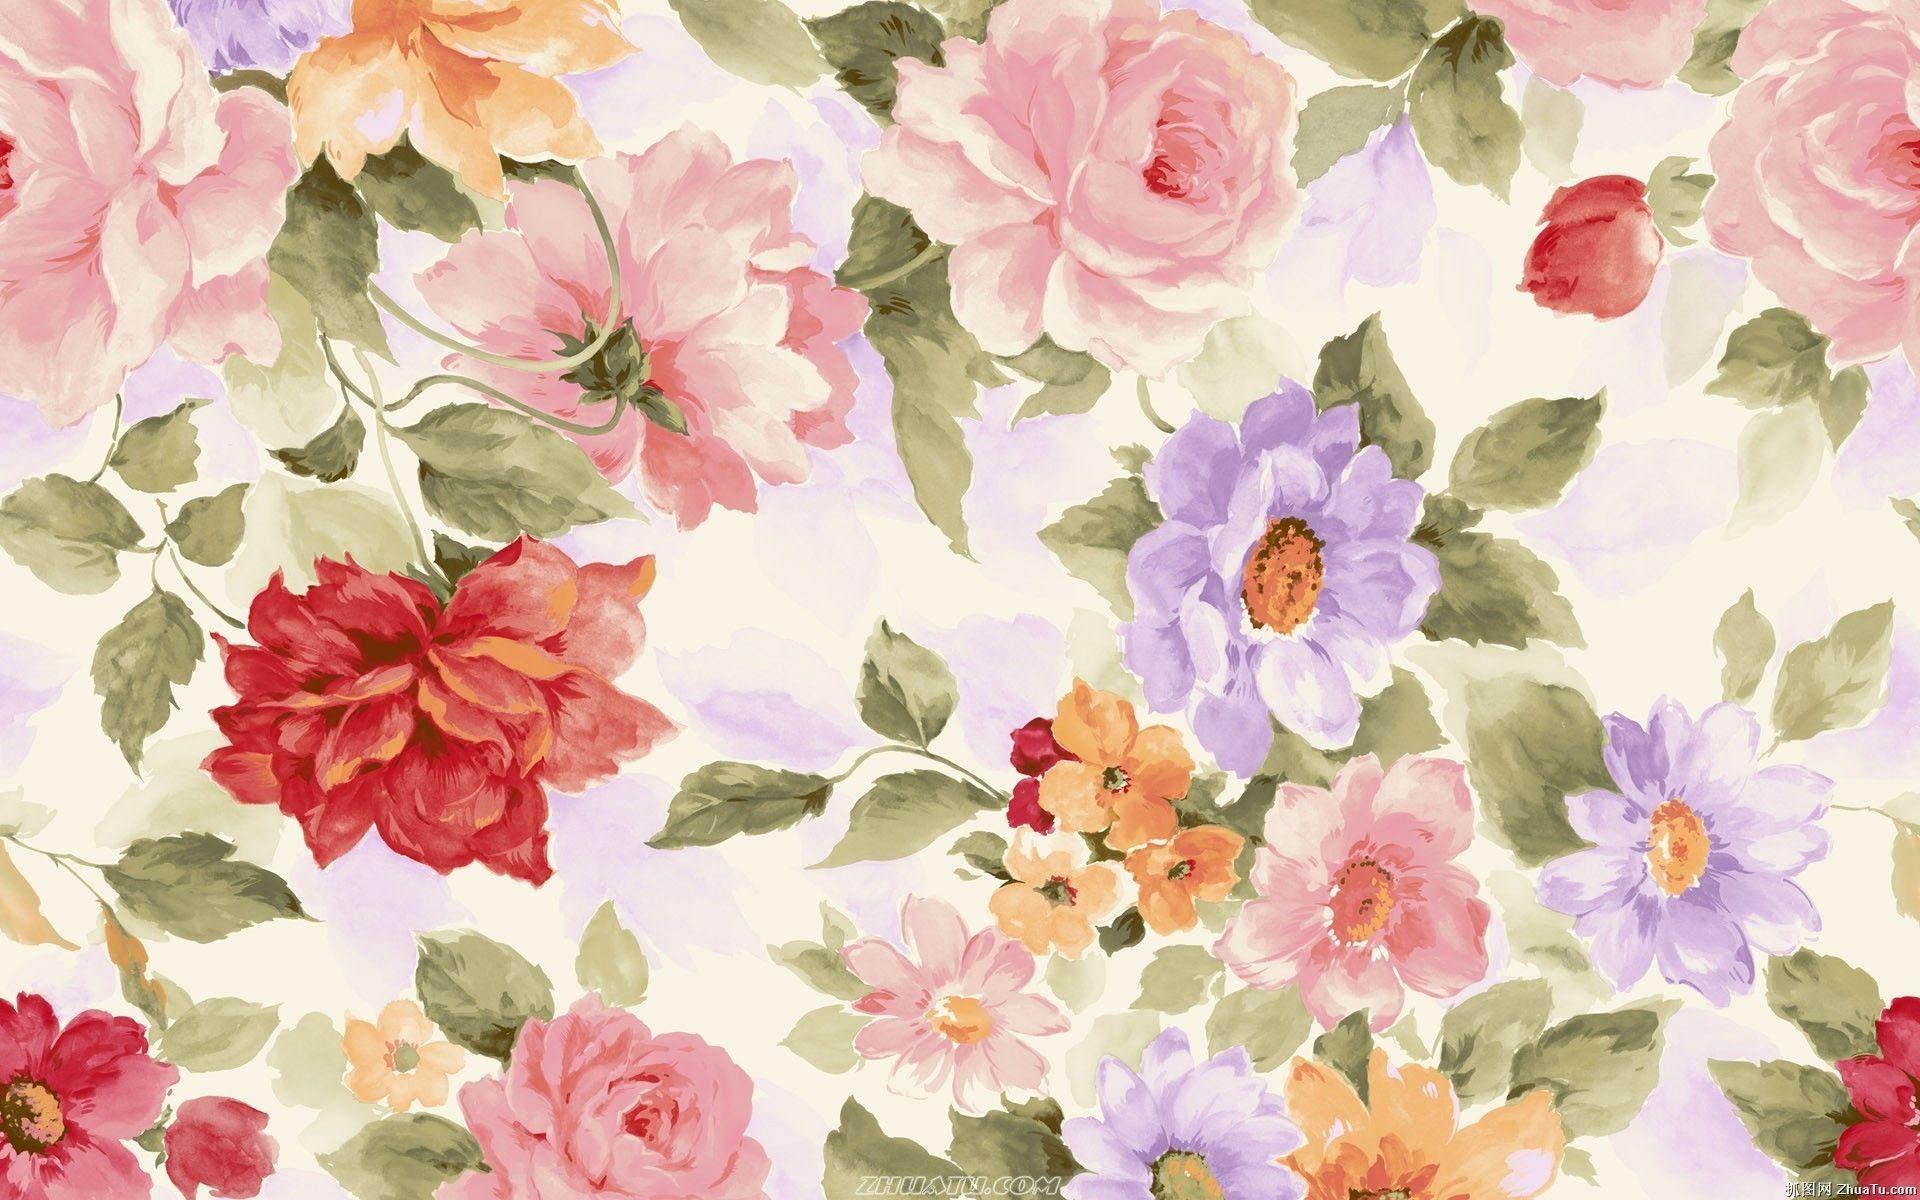 Watercolor Floral Removable Wallpaper 1920x1200